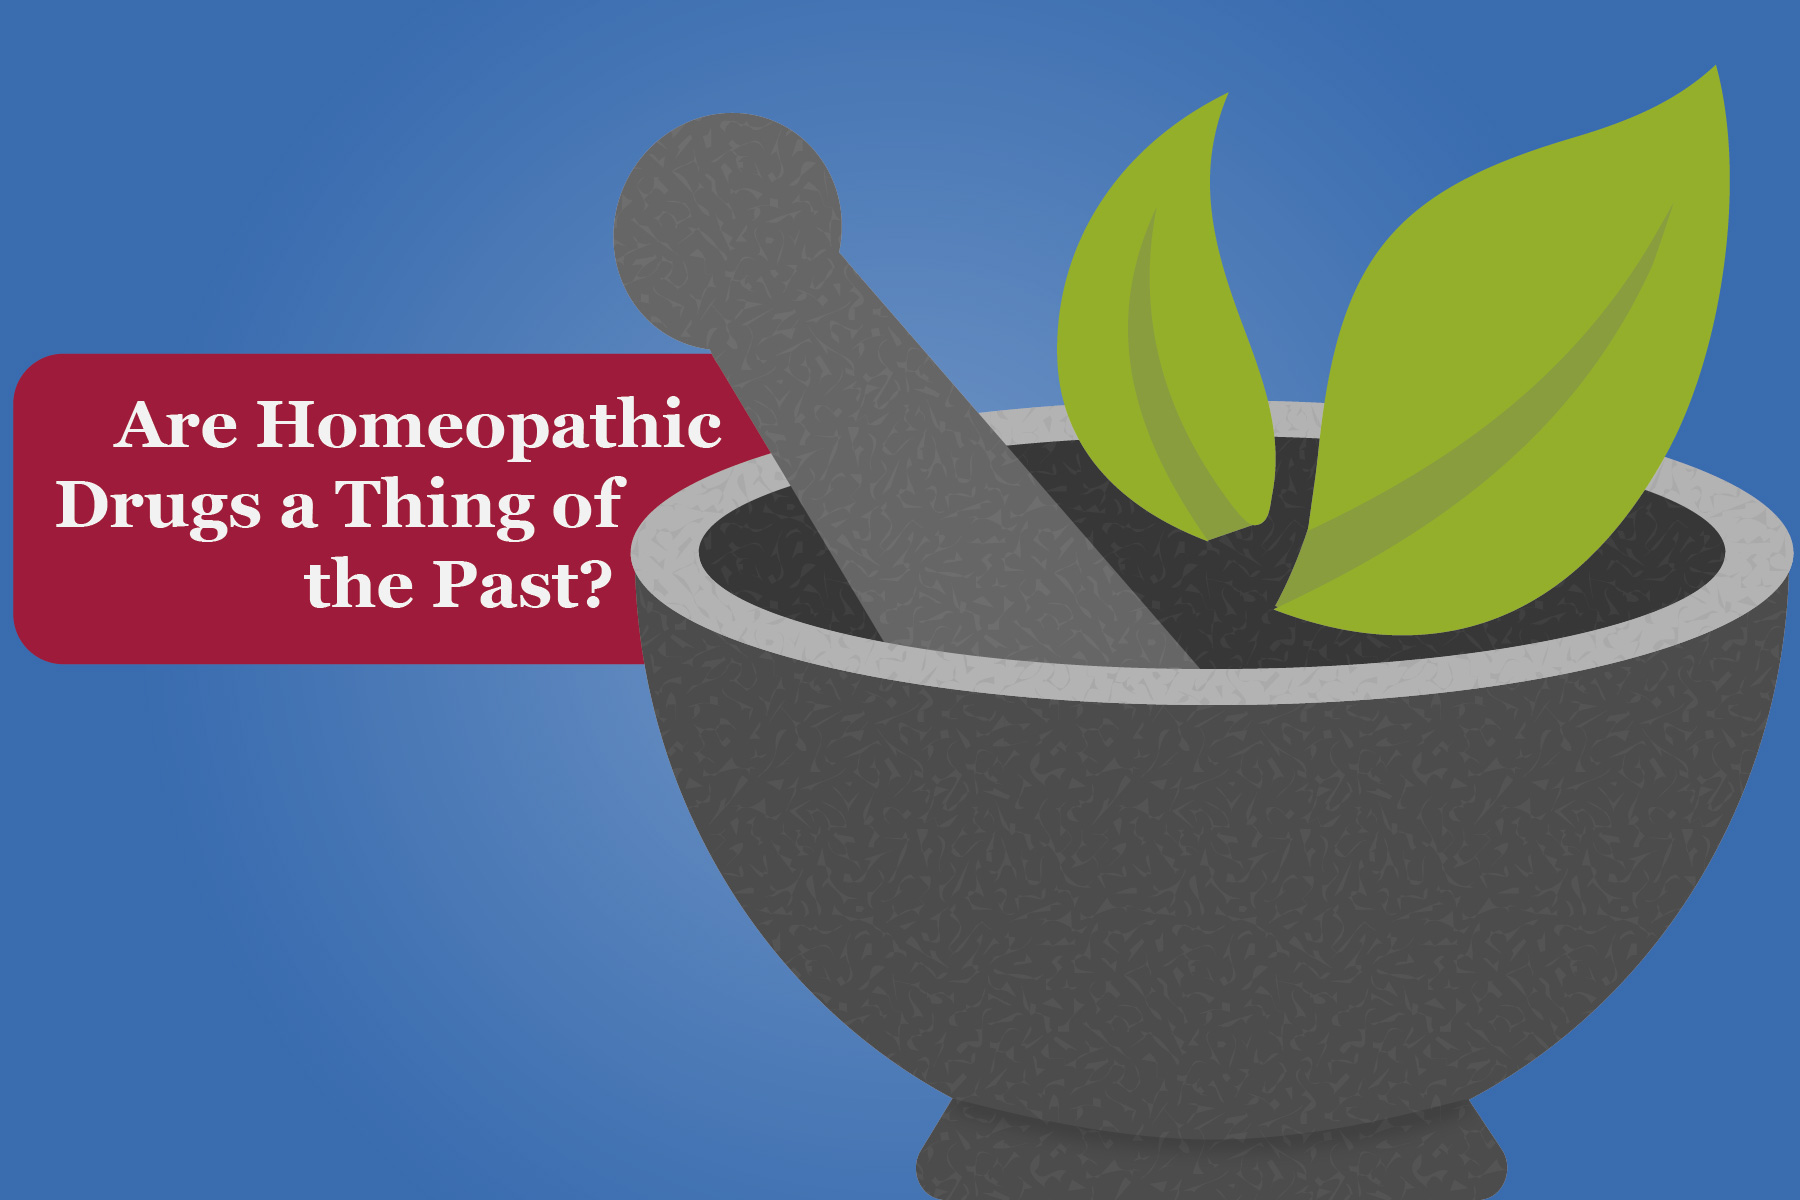 Are Homeopathic Drugs a Thing of the Past?